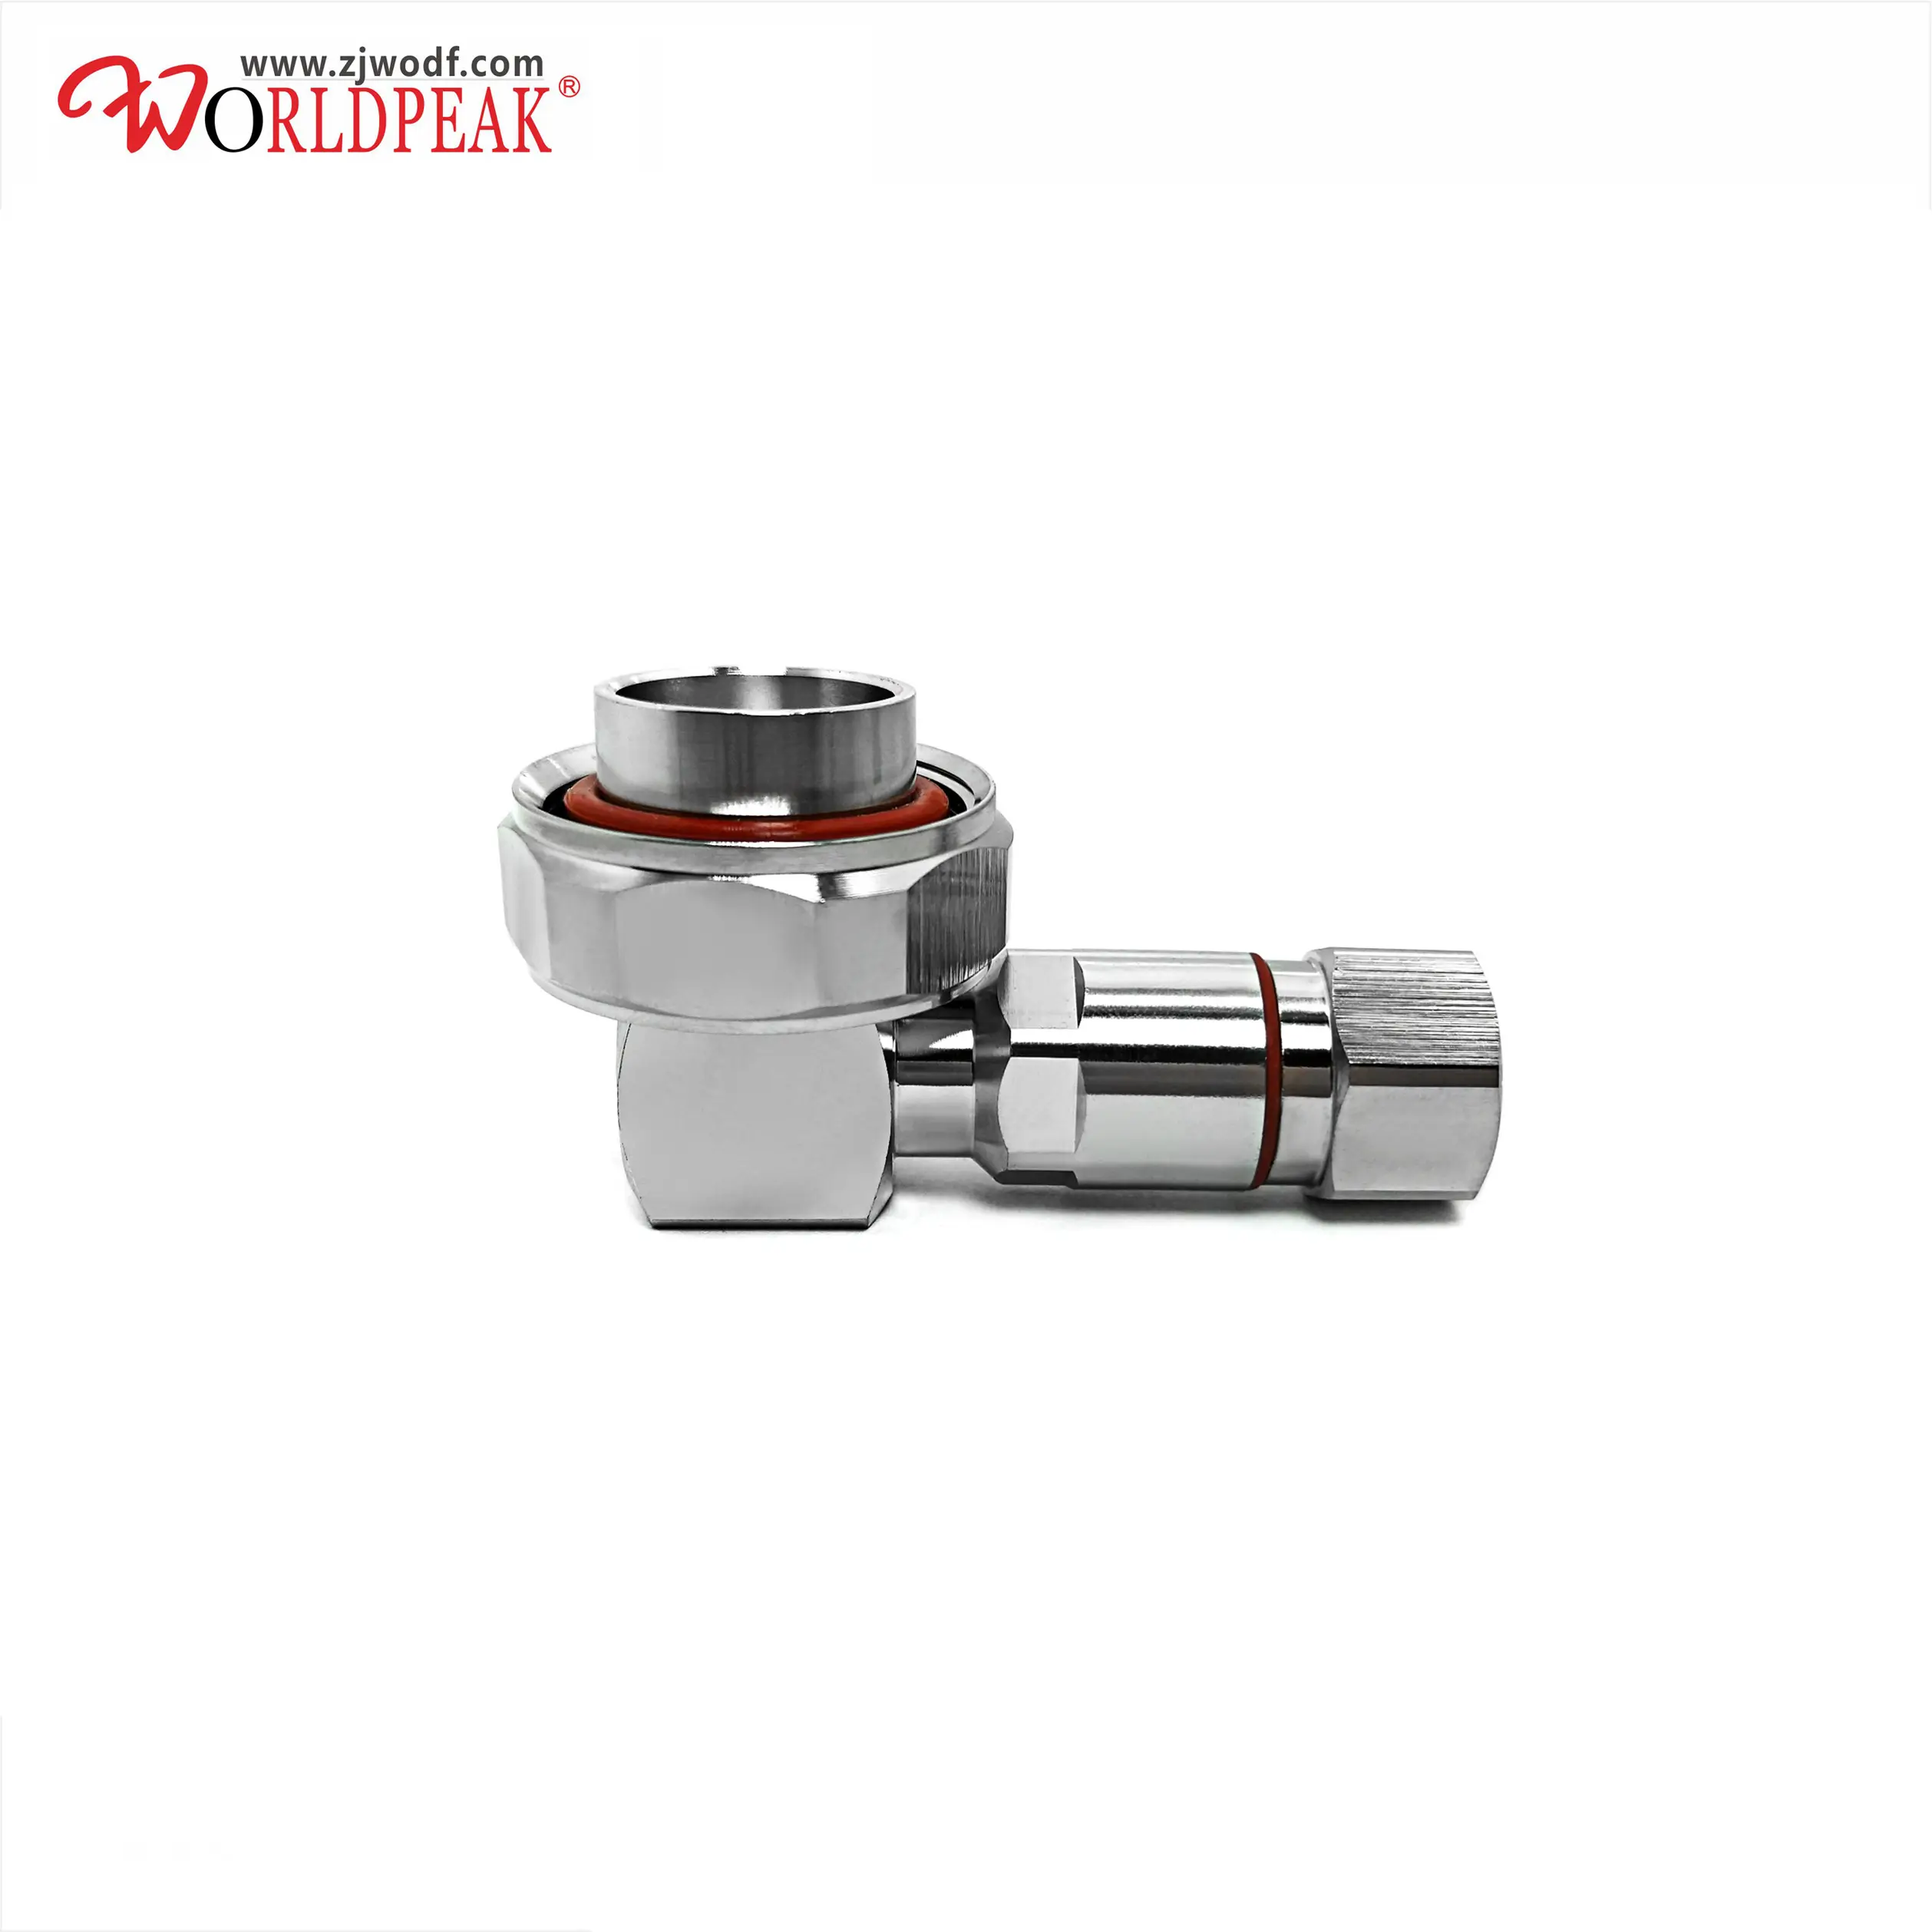 7 16 din Rf coaxial Connector 7/16 DIN Male Right Angle coax connector for 1/2in high flexible cable